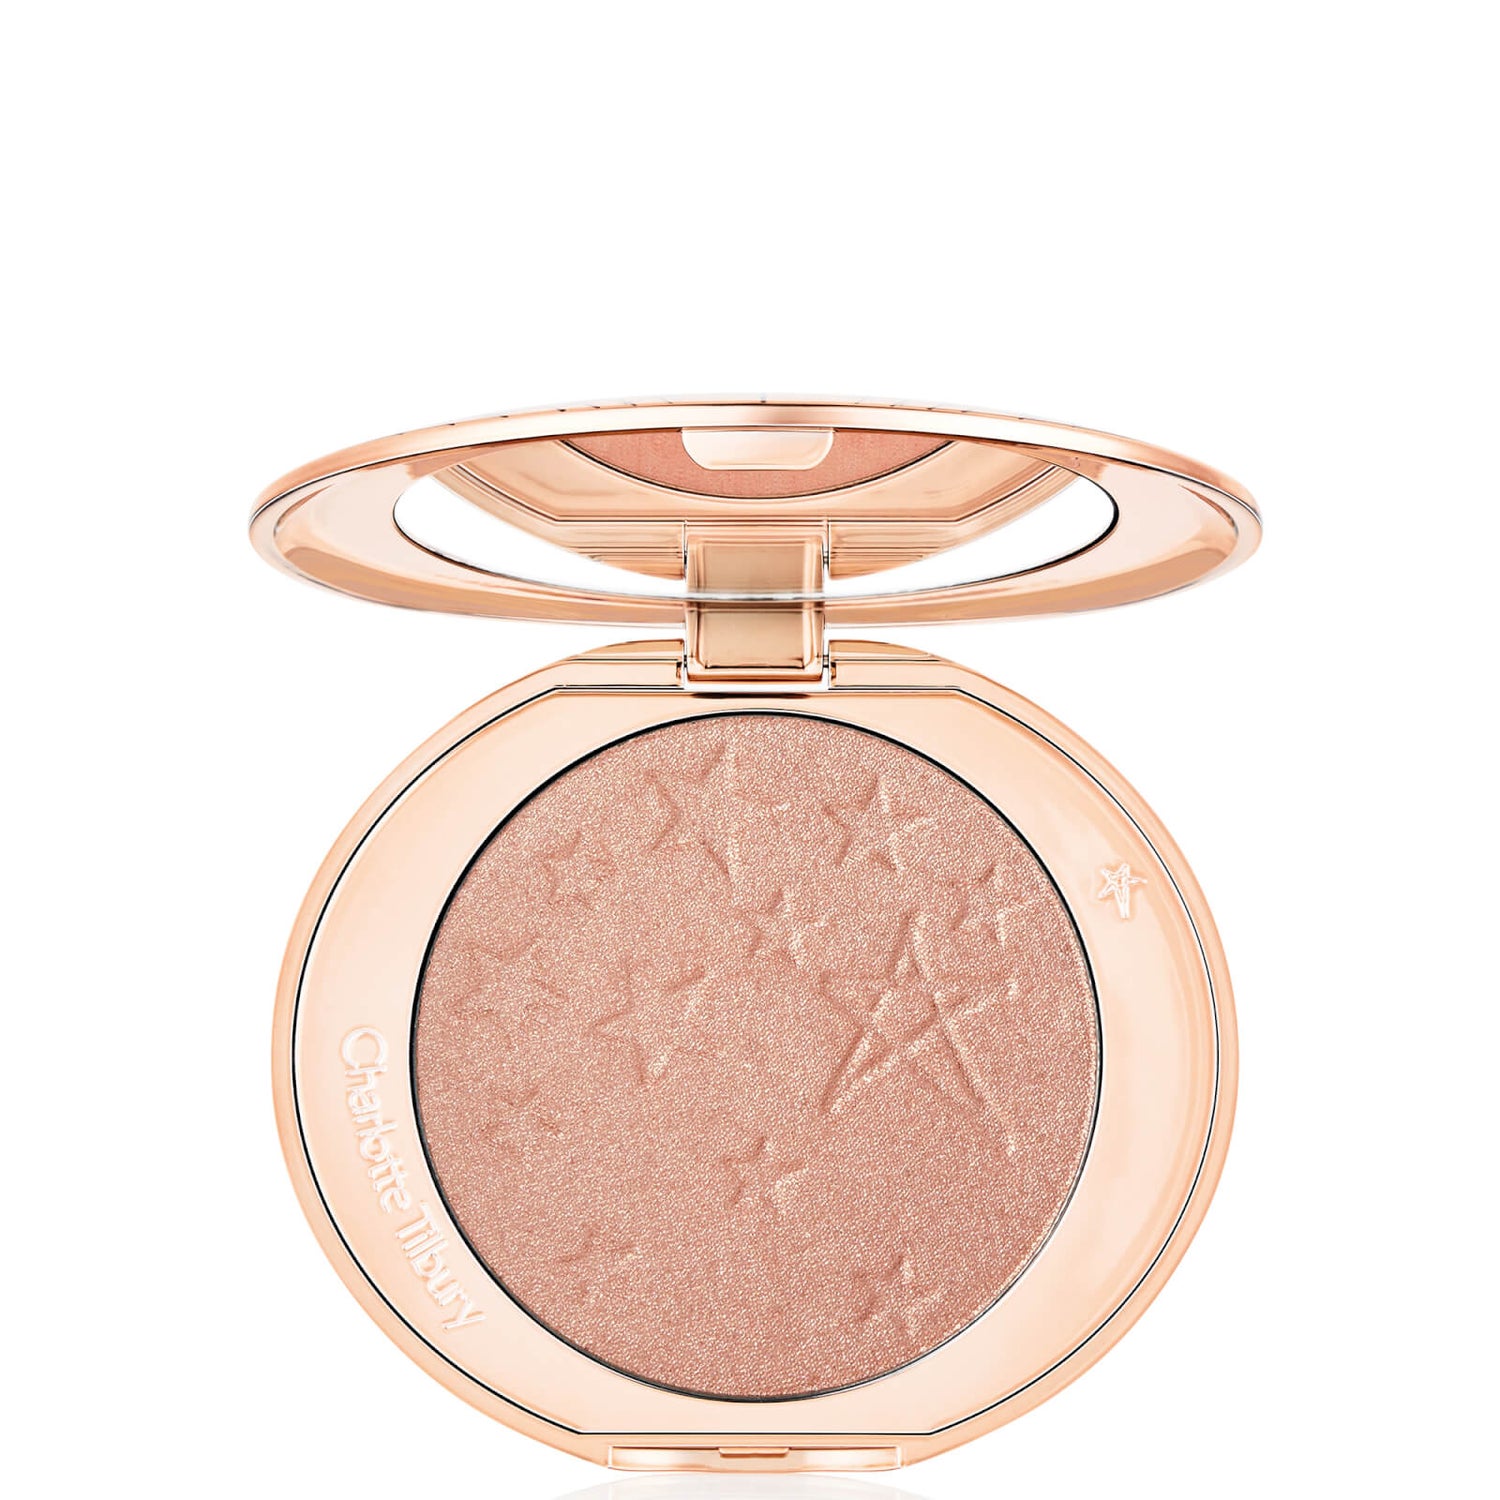 Charlotte Tilbury Hollywood Glow Glide Architect Highlighter 8g (Various Shades)